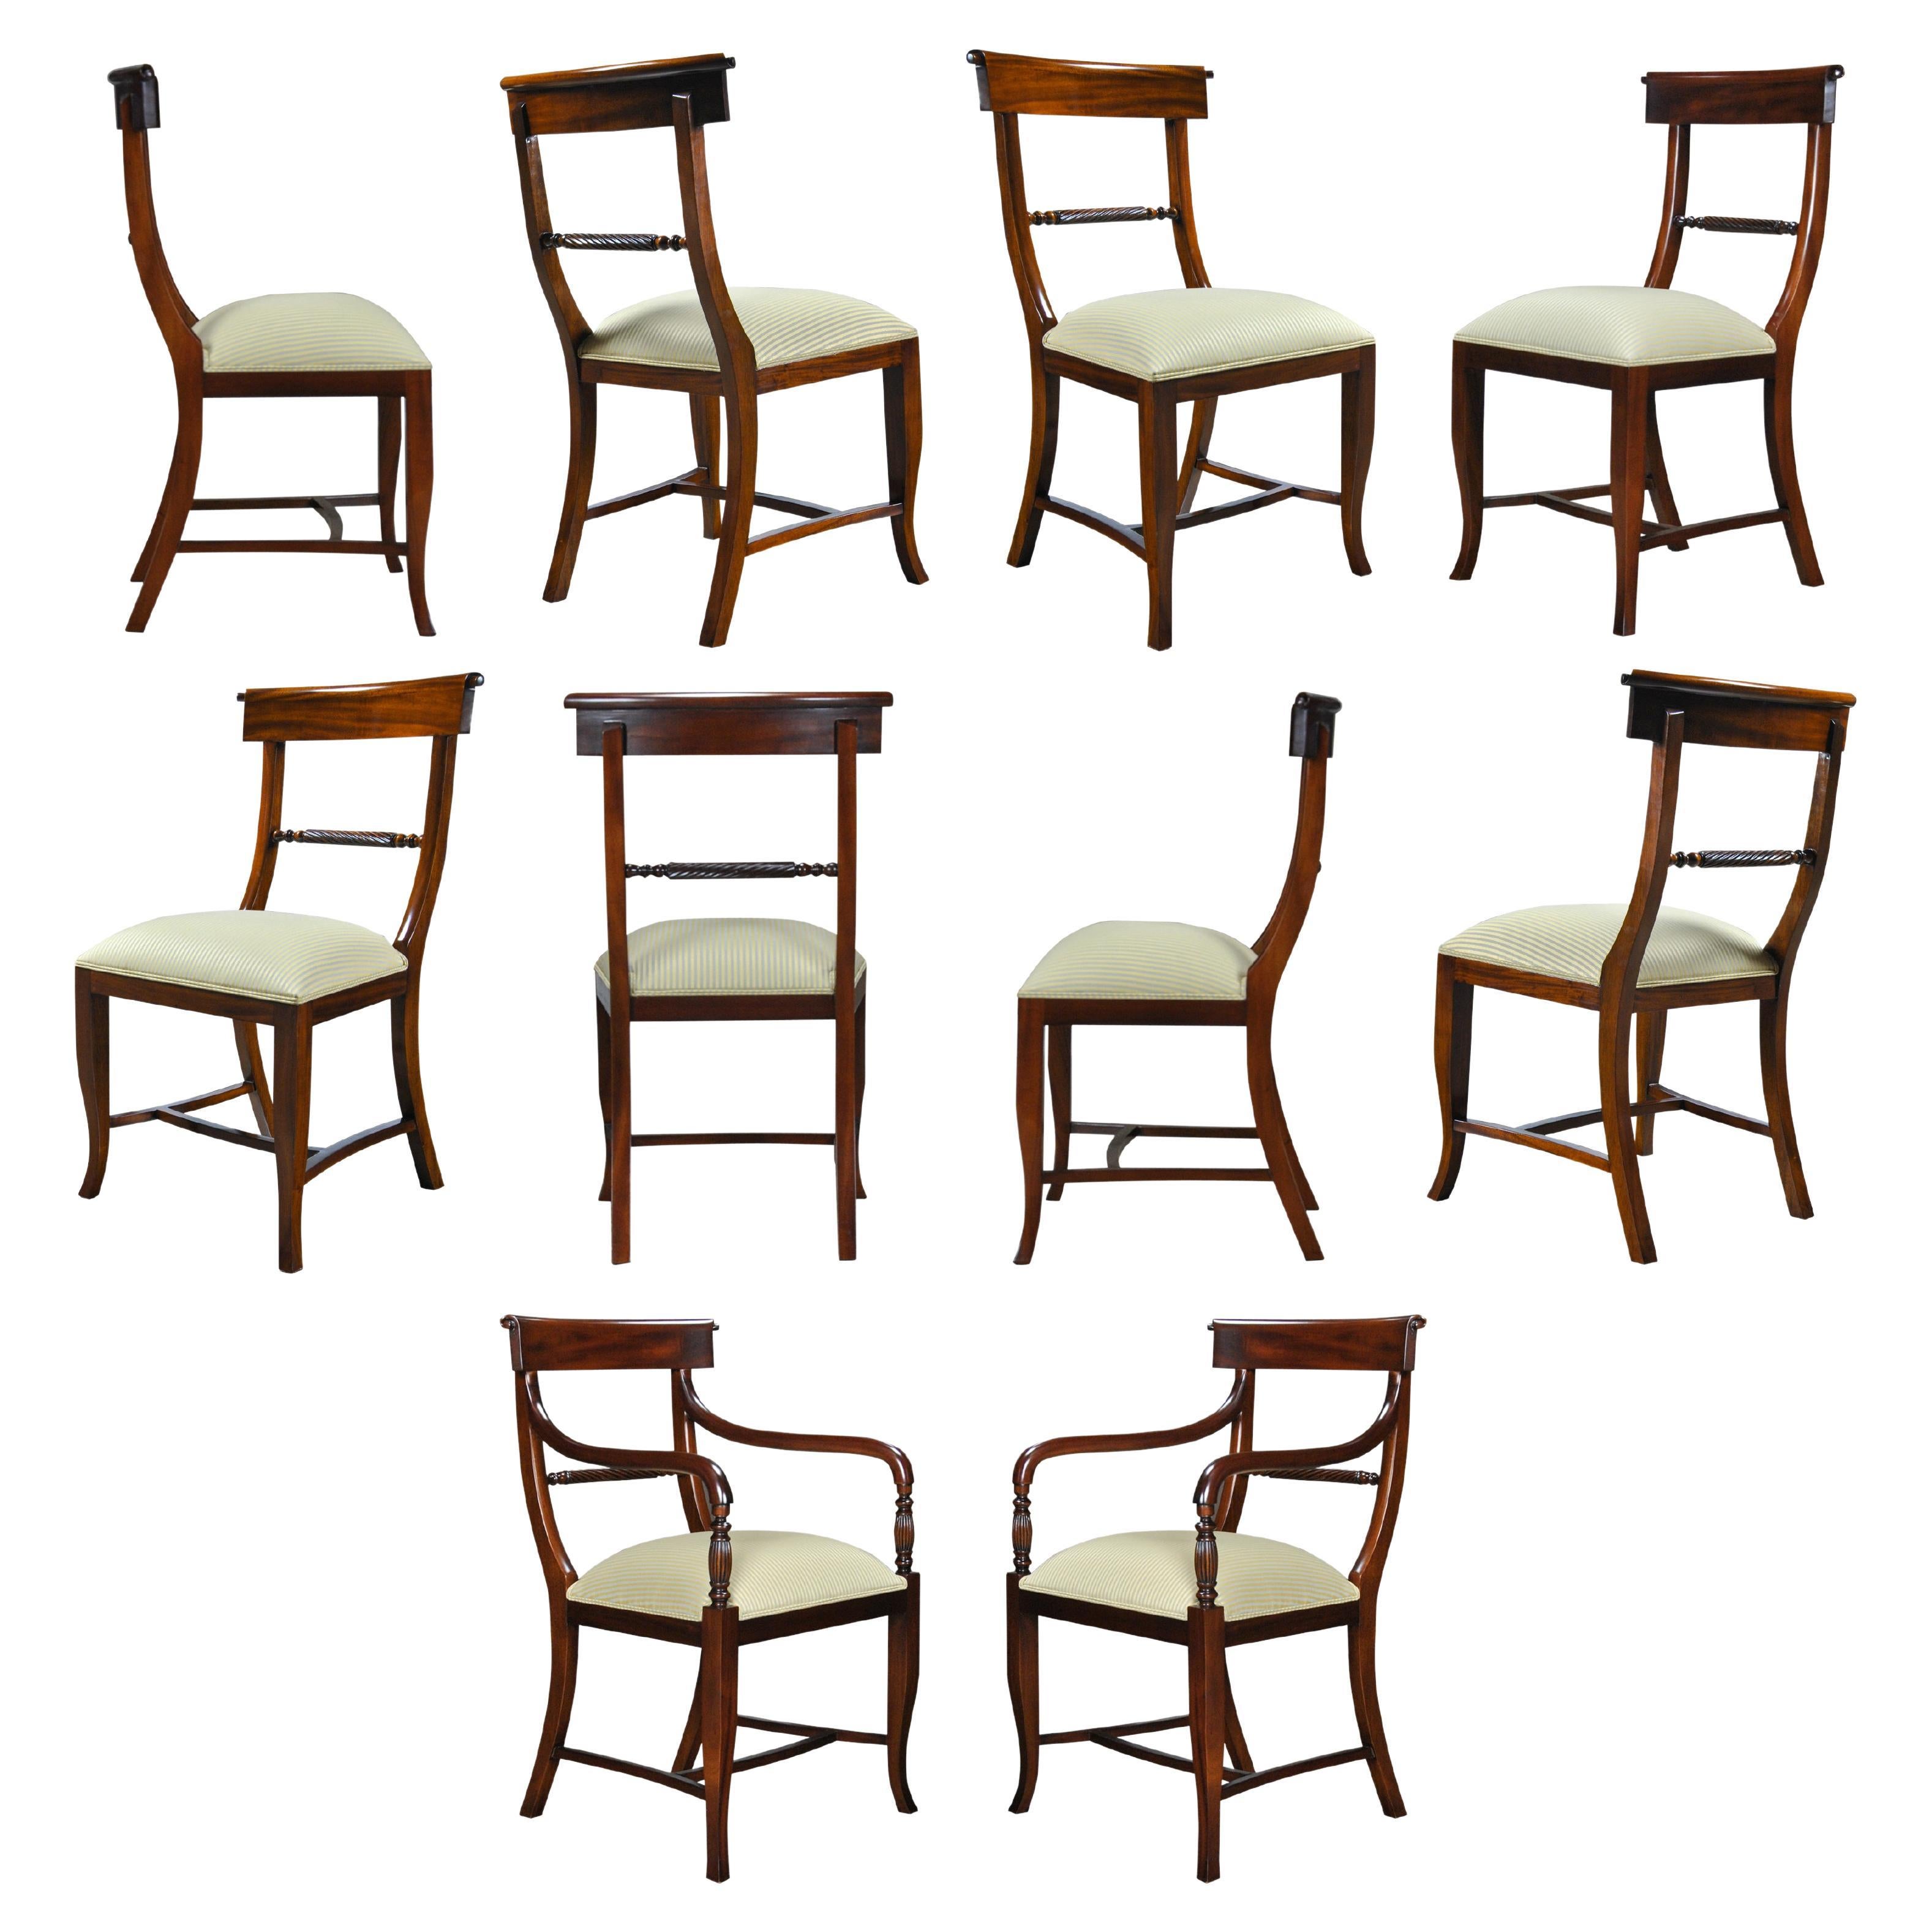 Twist Back Chairs, Set of 10